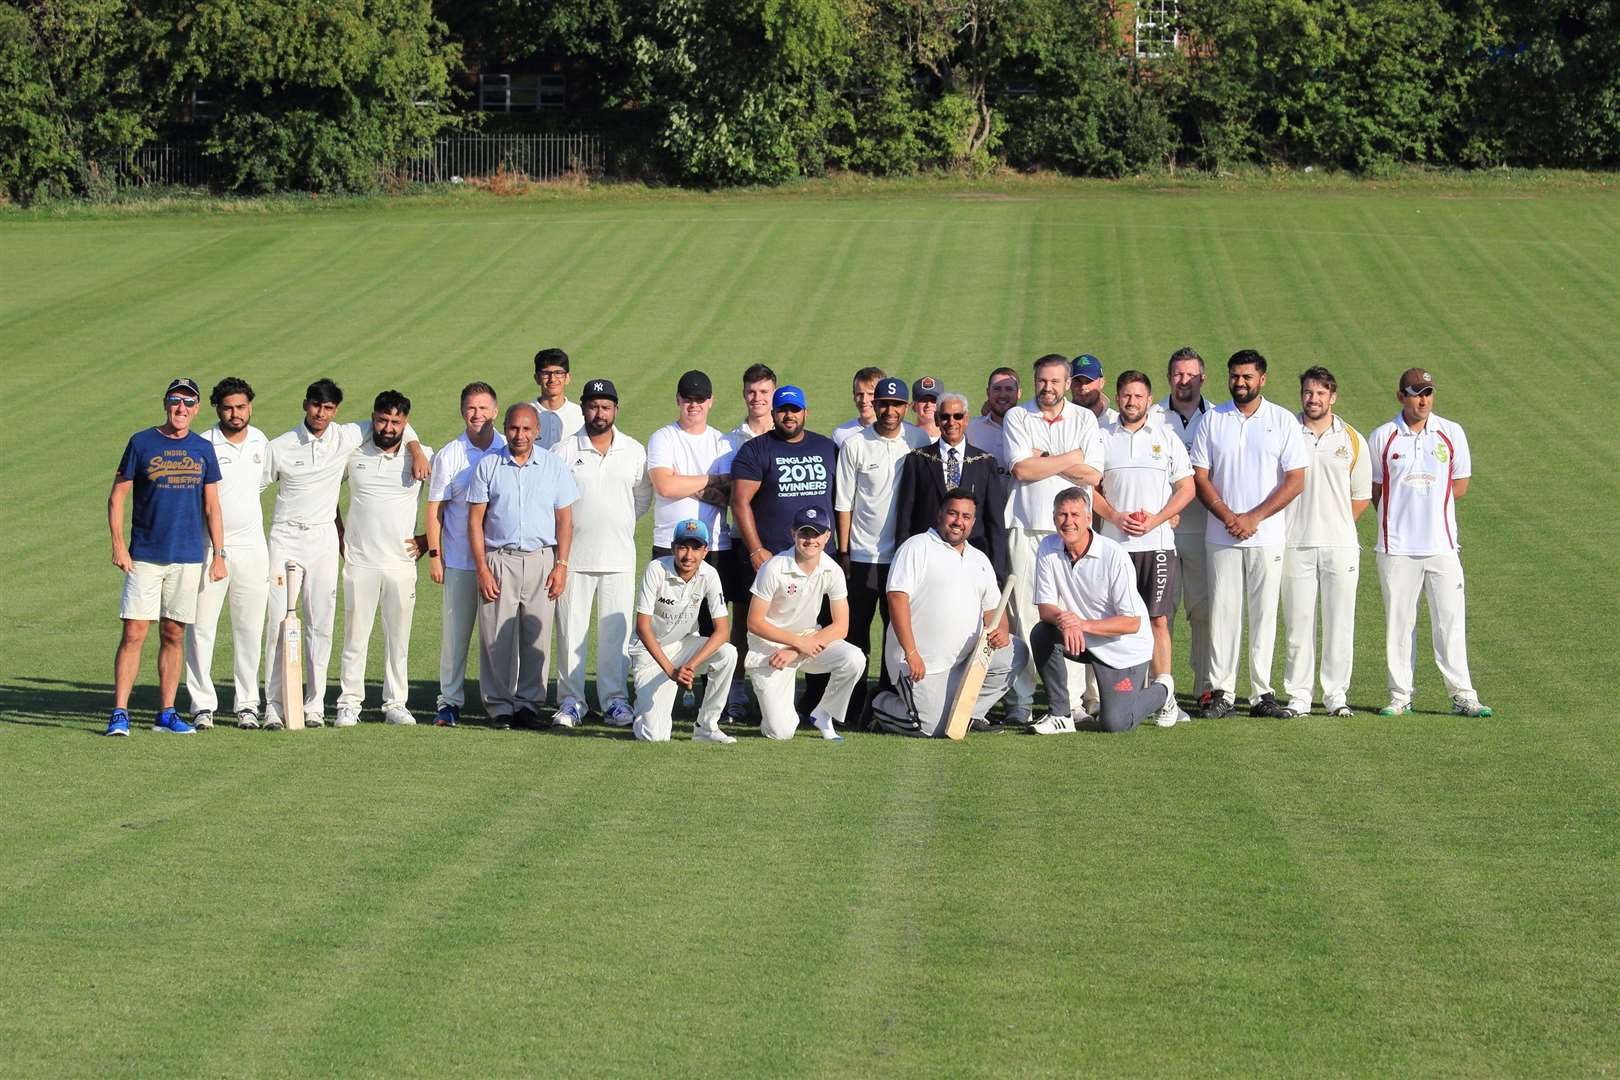 A Community XI faced off against a Police XI to raise money for charity last month. Picture: James Harris (16003436)